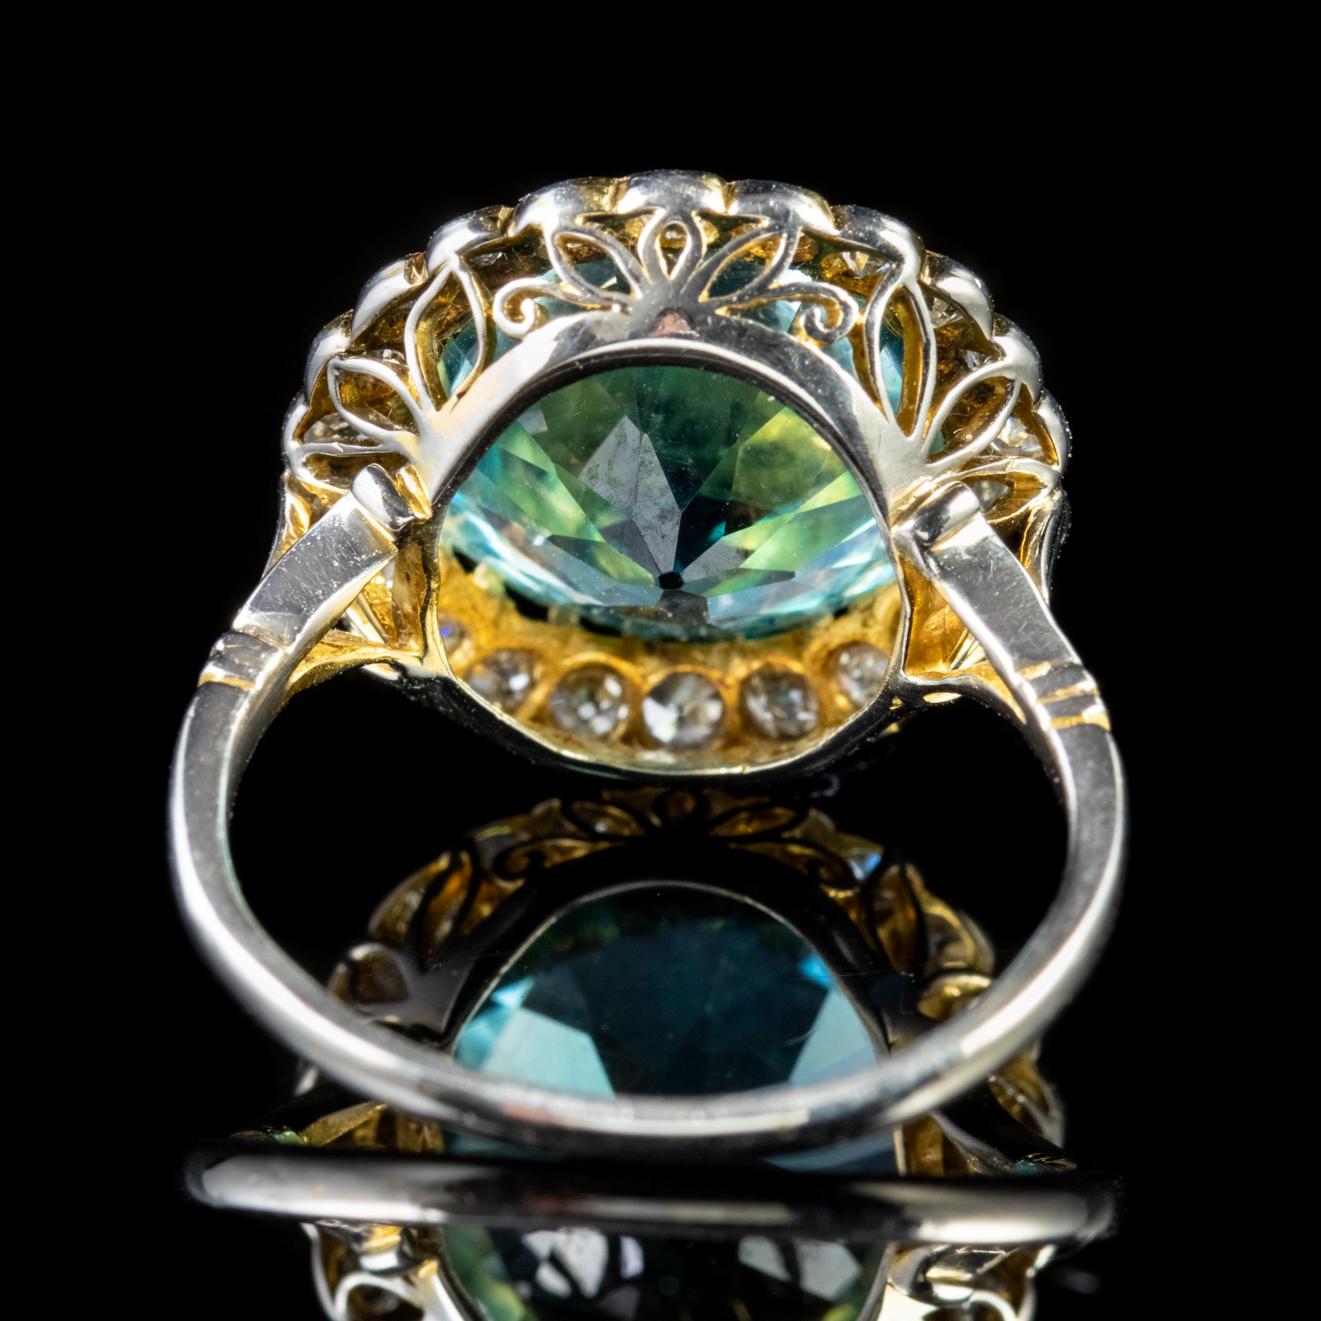 Antique Edwardian 8 Carat Blue Zircon Cluster Ring, circa 1905 In Good Condition For Sale In Lancaster, Lancashire